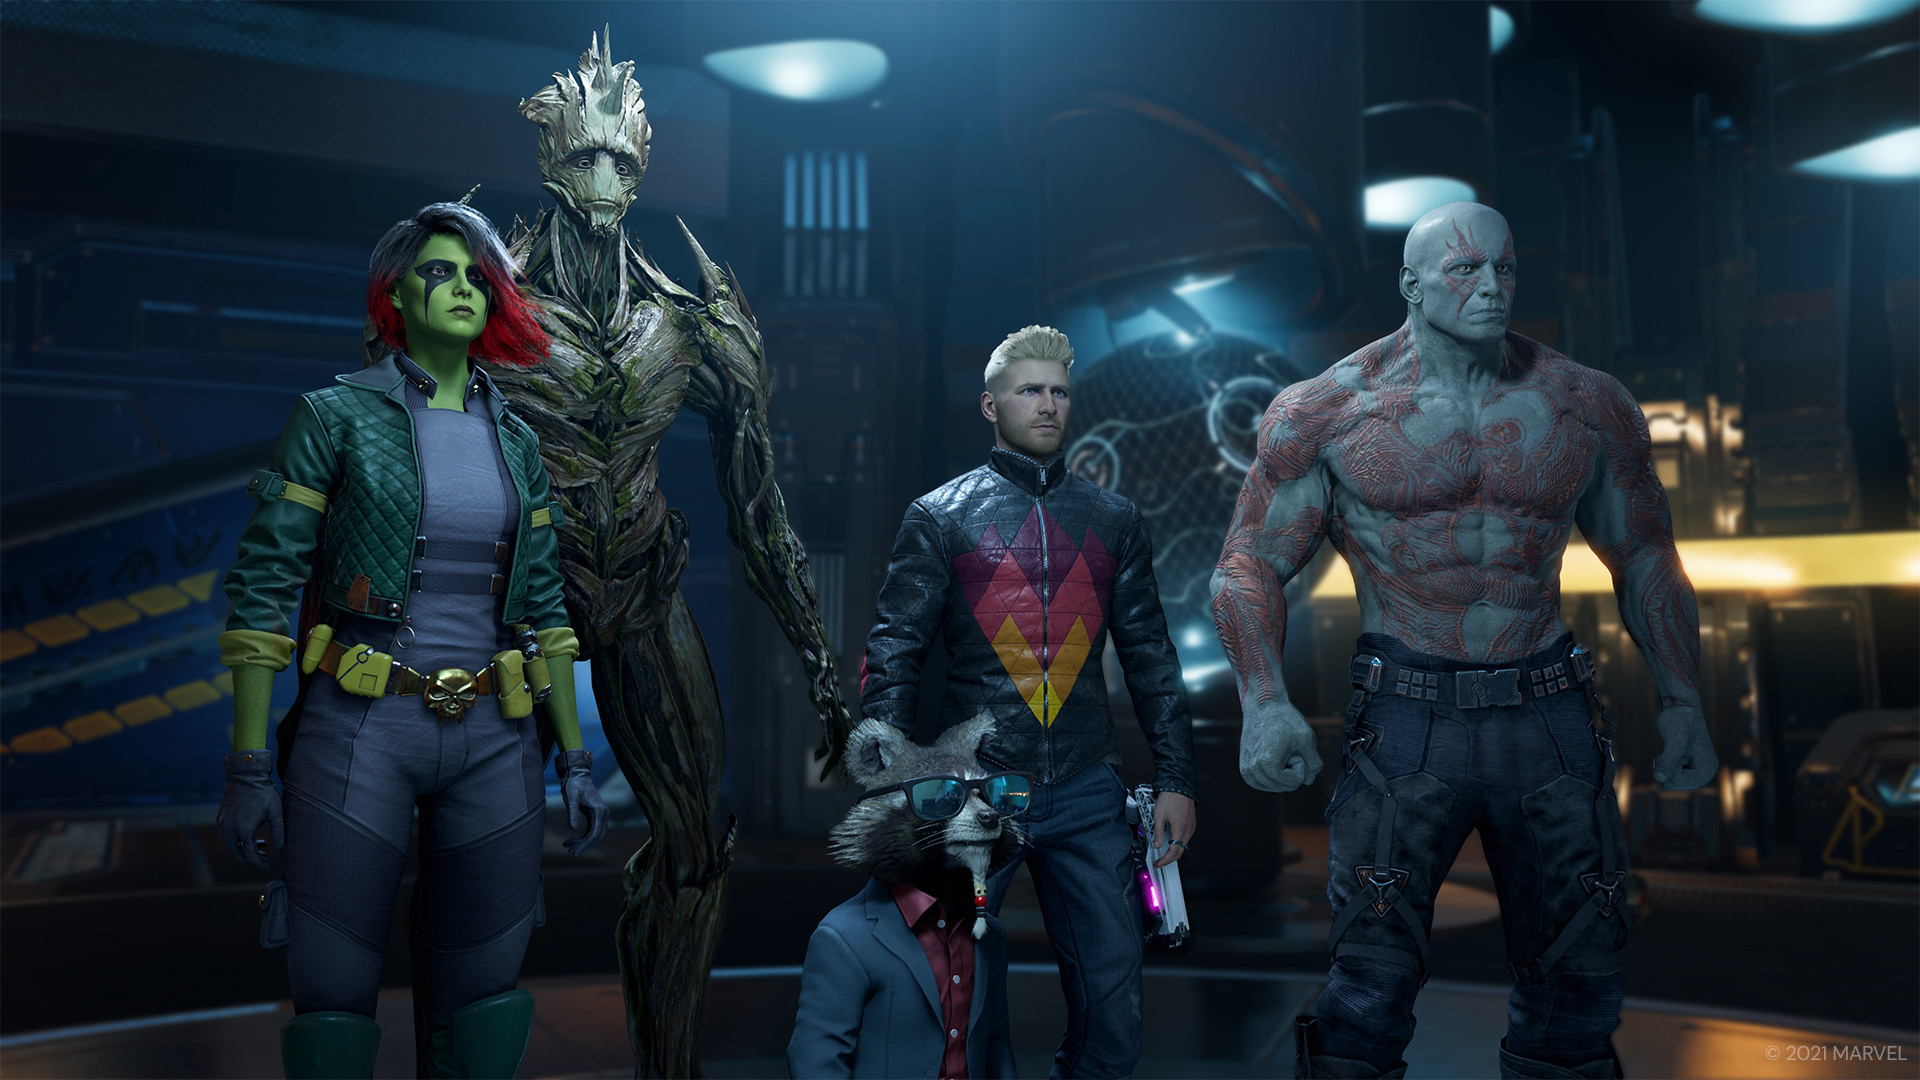 Don't Expect the Guardians to Look the Same as Their Movie Counterparts